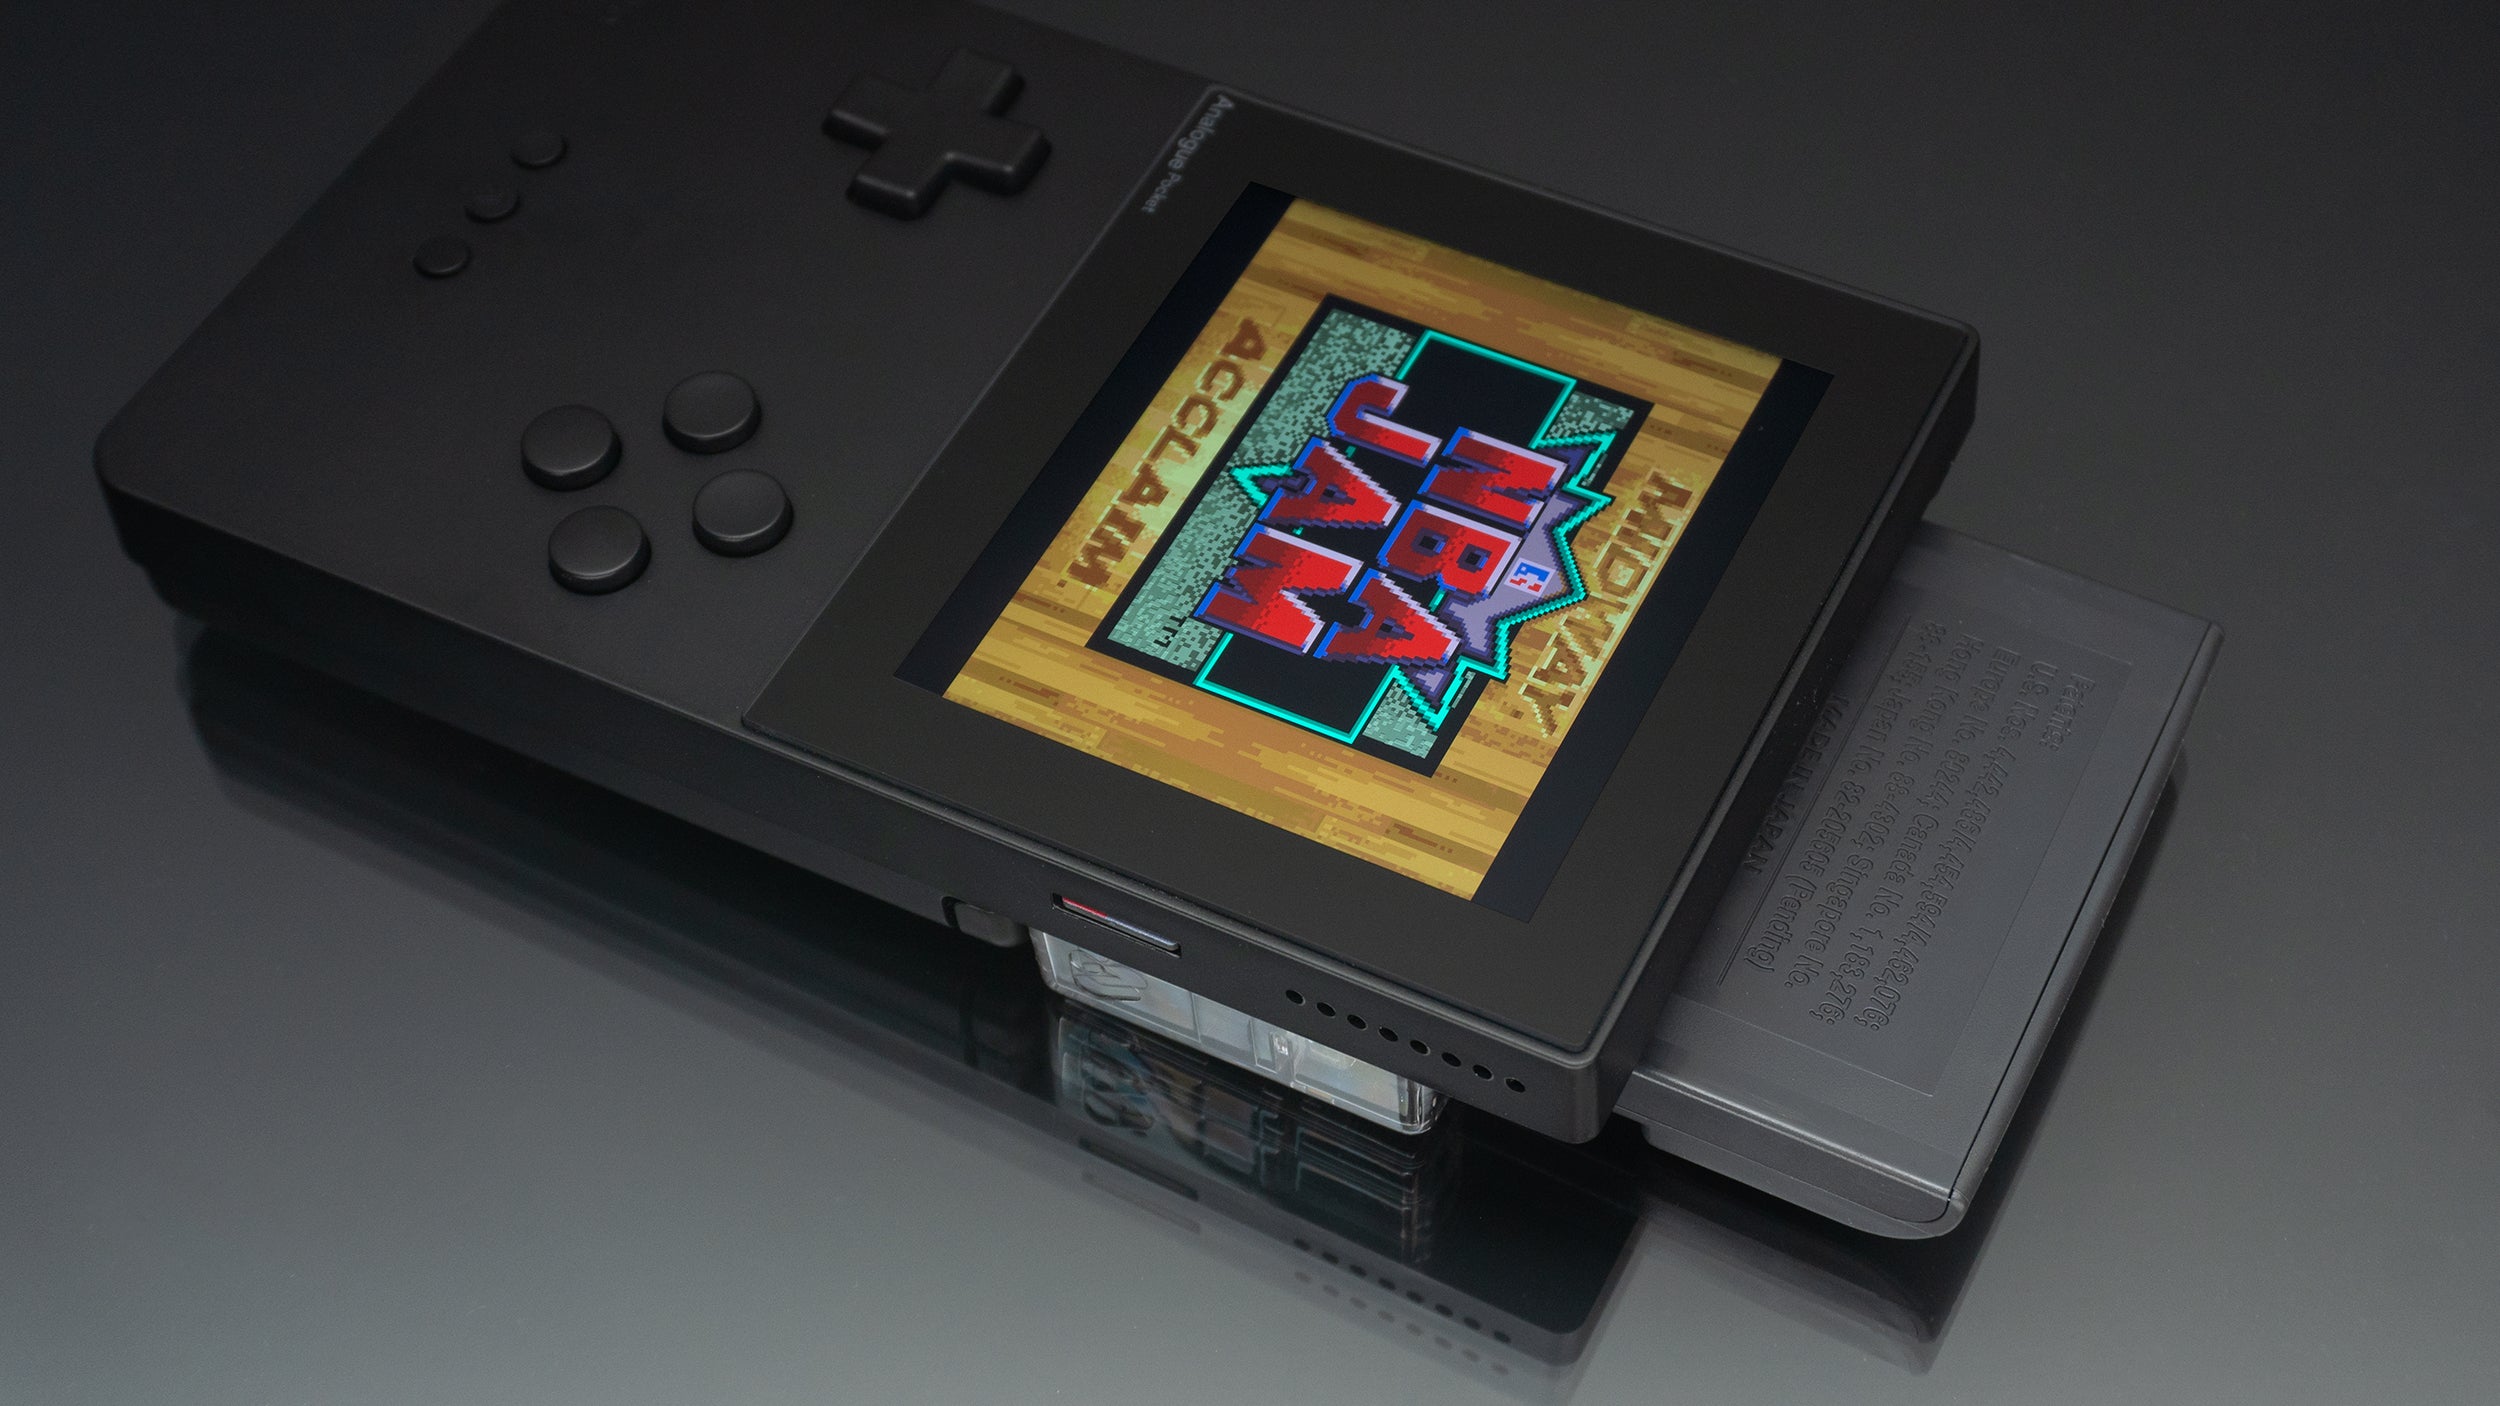 In the case of Sega Game Gear games, the Pocket's cartridge adaptor leaves them over-hanging the top of the Pocket quite a bit, to the point where it limits portability. (Photo: Andrew Liszewski/Gizmodo)